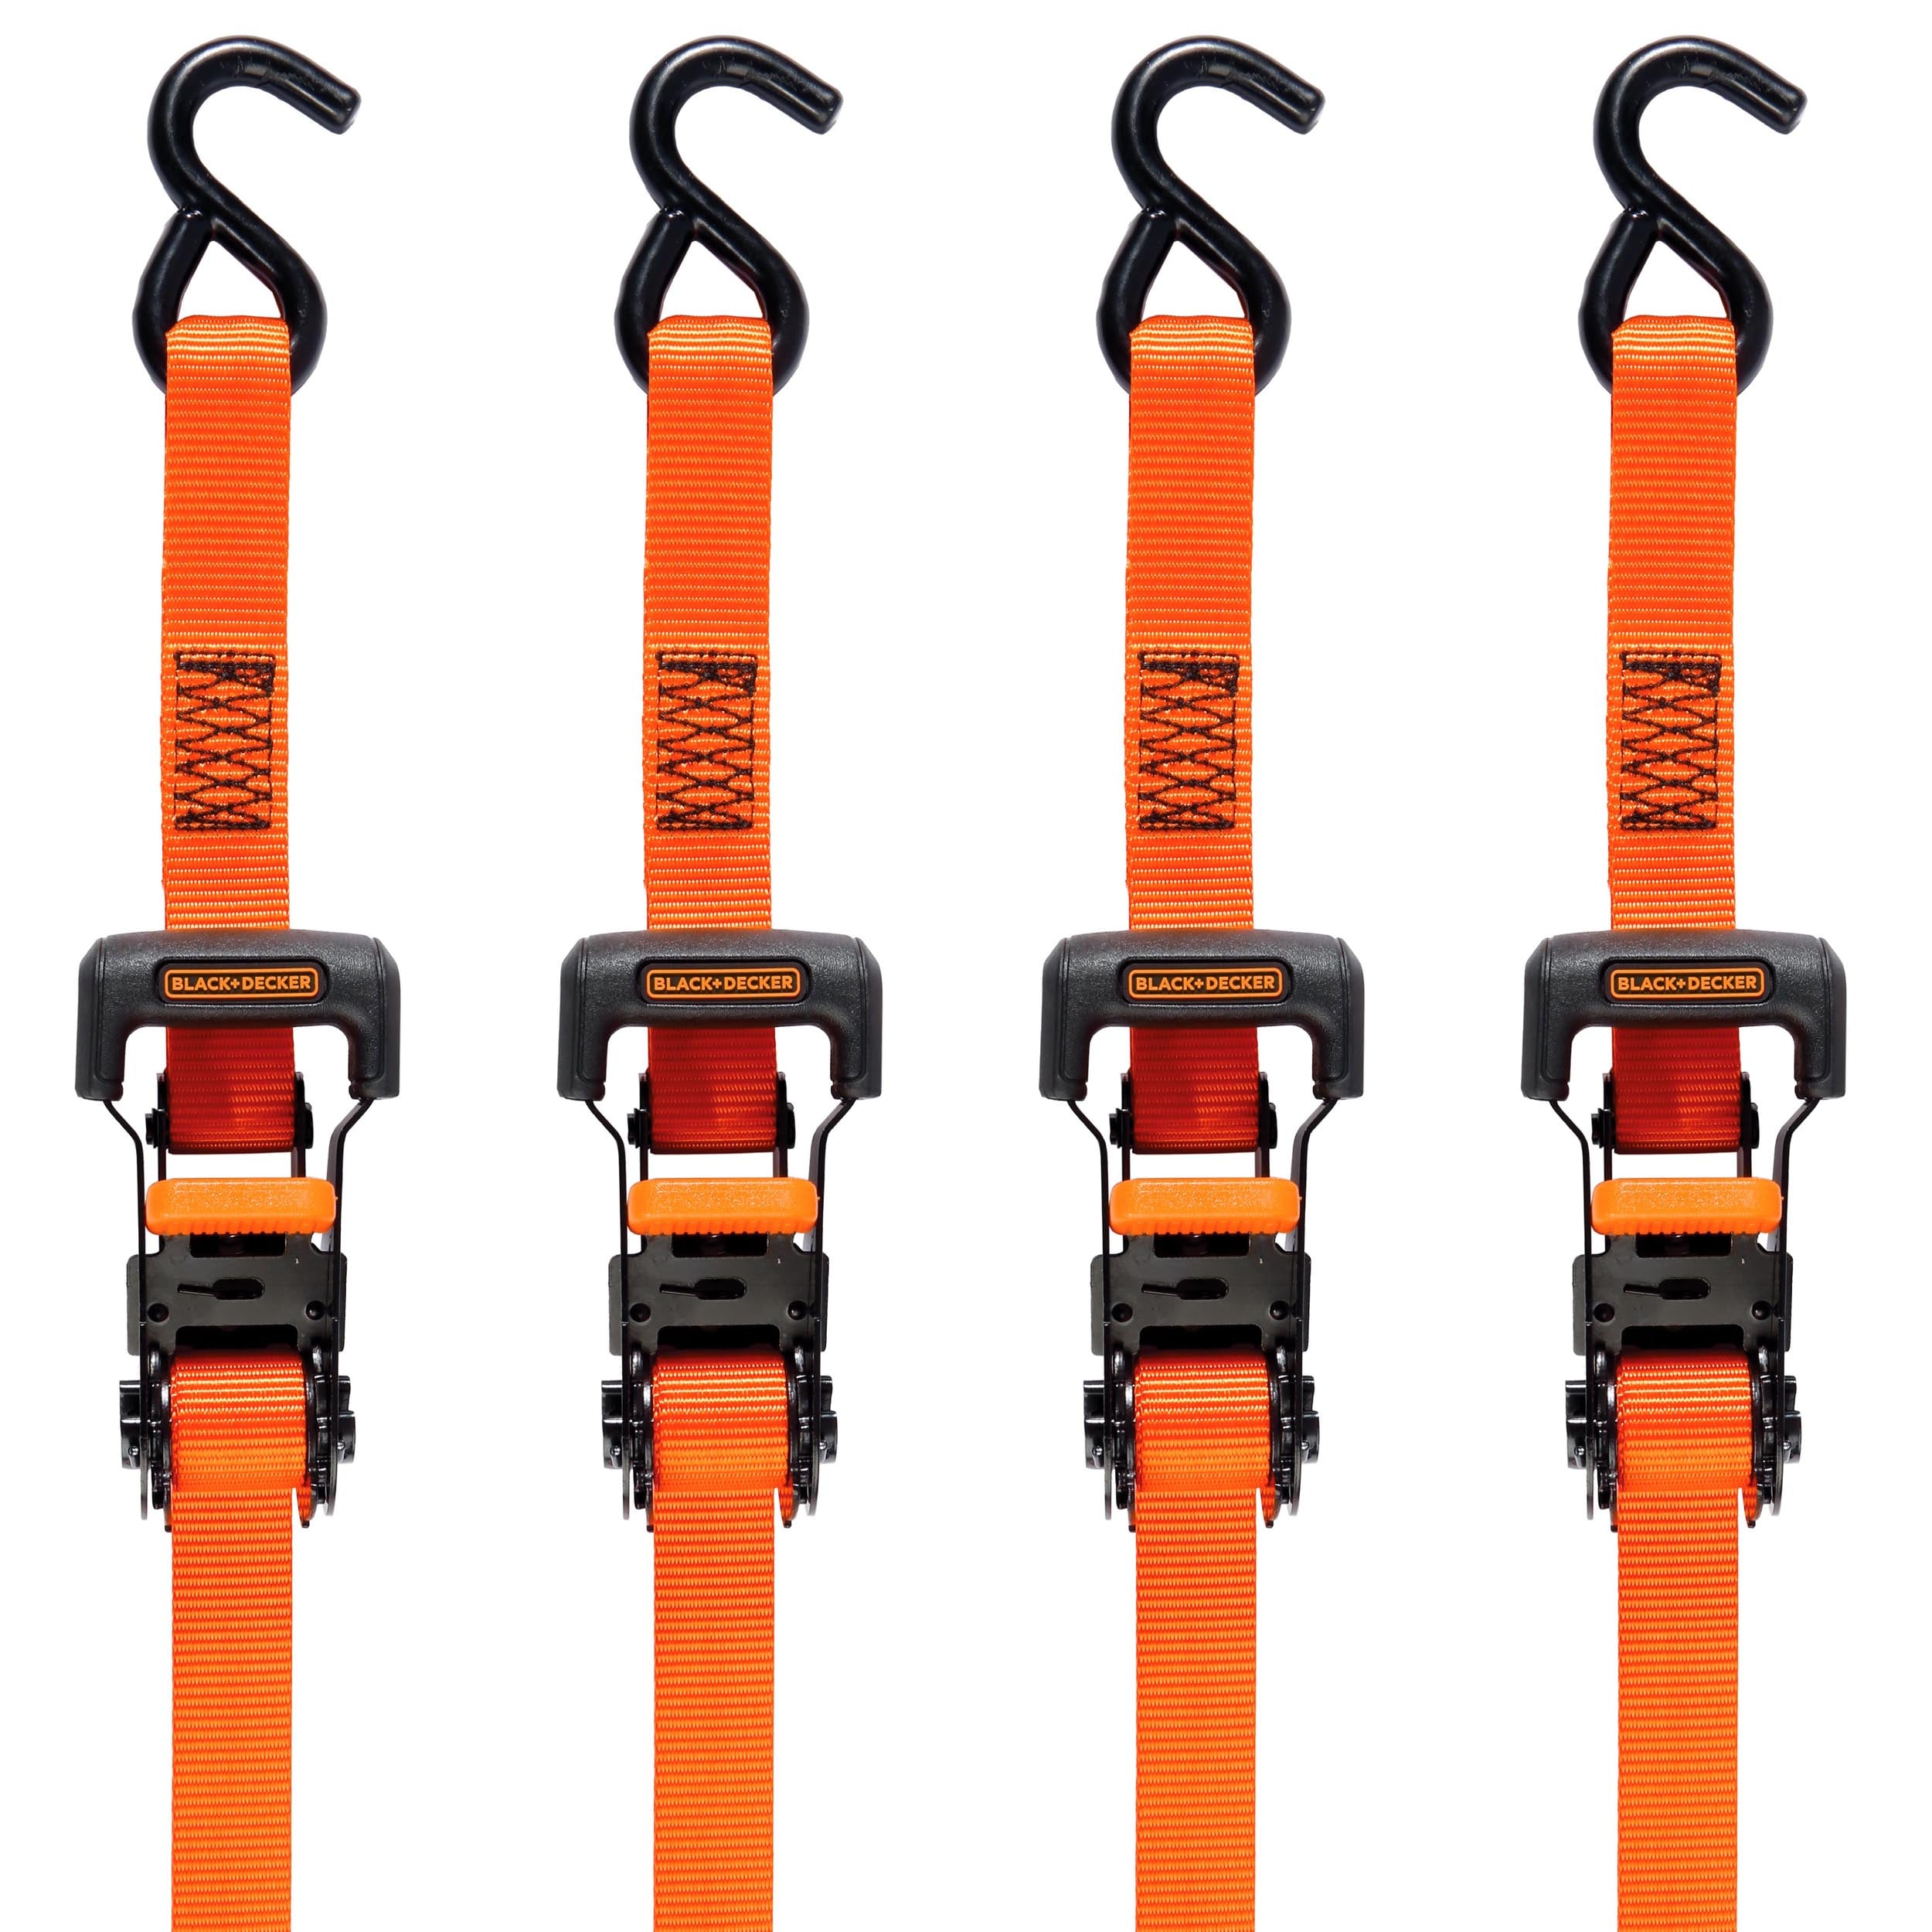 Rhino USA 1-in x 10-ft Ratcheting Strap Tie Down 4-Pack 403-lb at